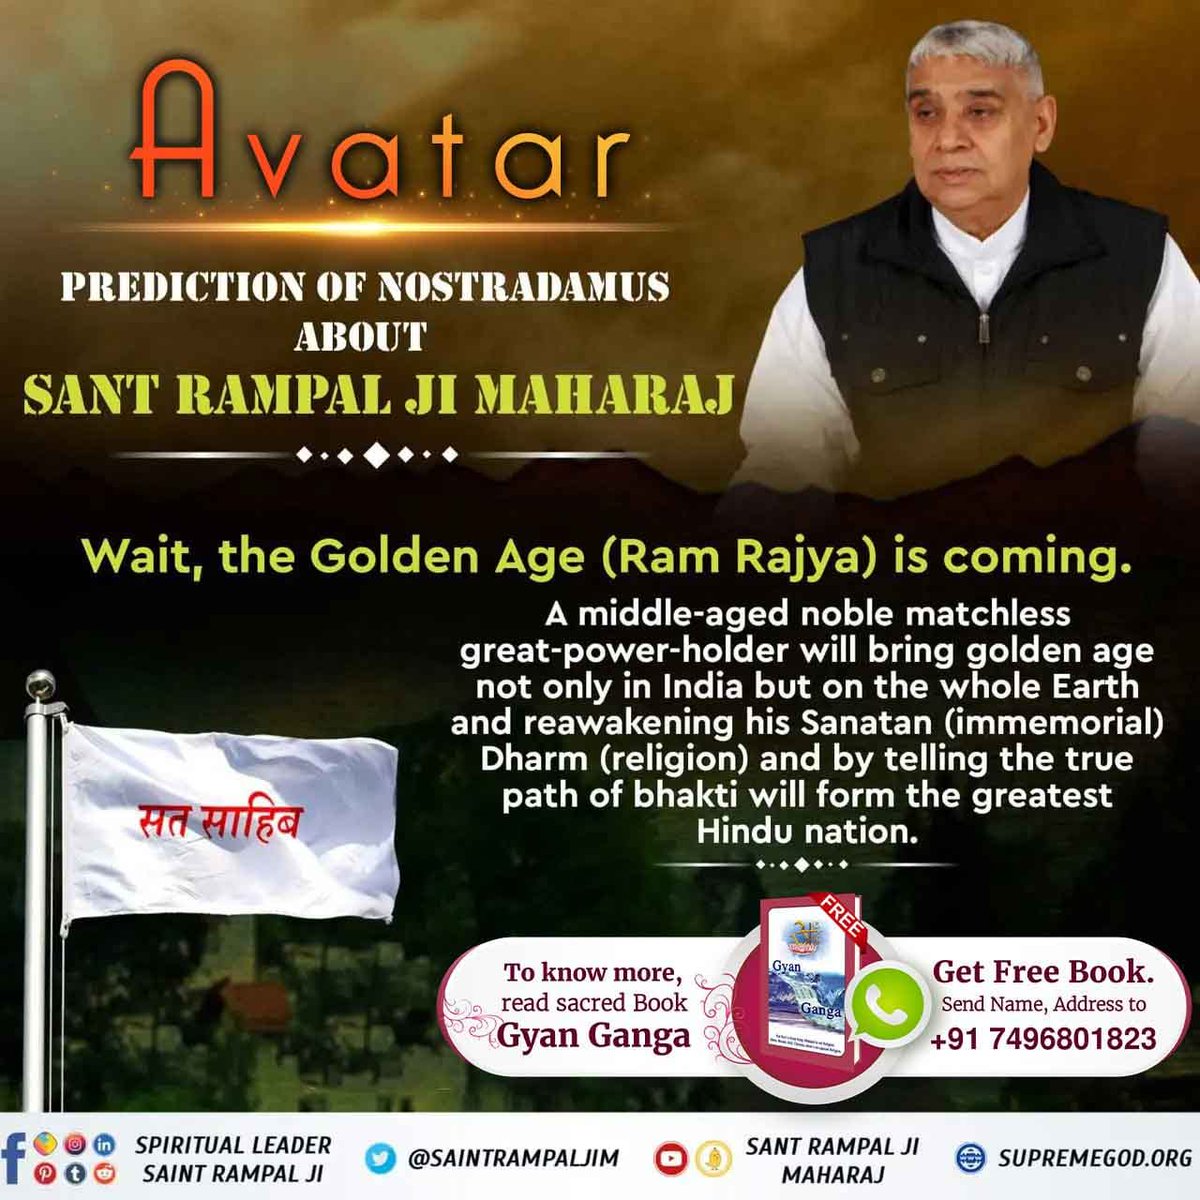 #Mysterious_Prophecies #Great_Prophecies_2024 'In India, the complete saint will be fair, without a beard or mustache, and with white hair on their head.' - Florence, a renowned American prophetess. This prophecy perfectly aligns with Sant Rampal Ji Maharaj.